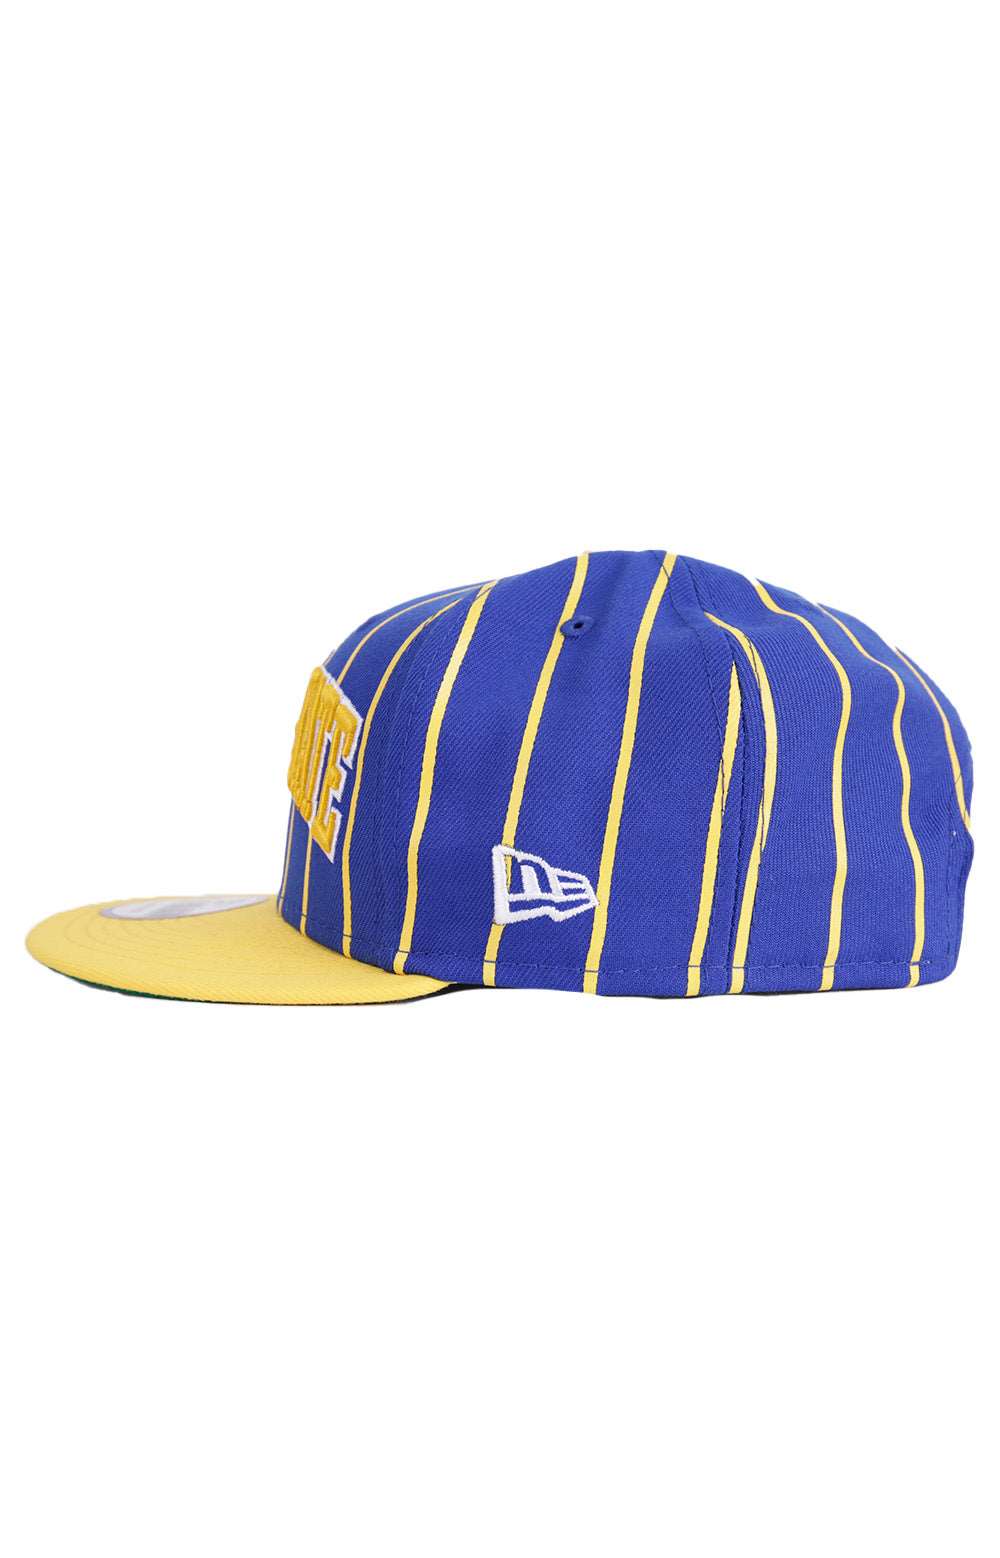 Golden State Warriors City Arch 950 Snap-Back Hat